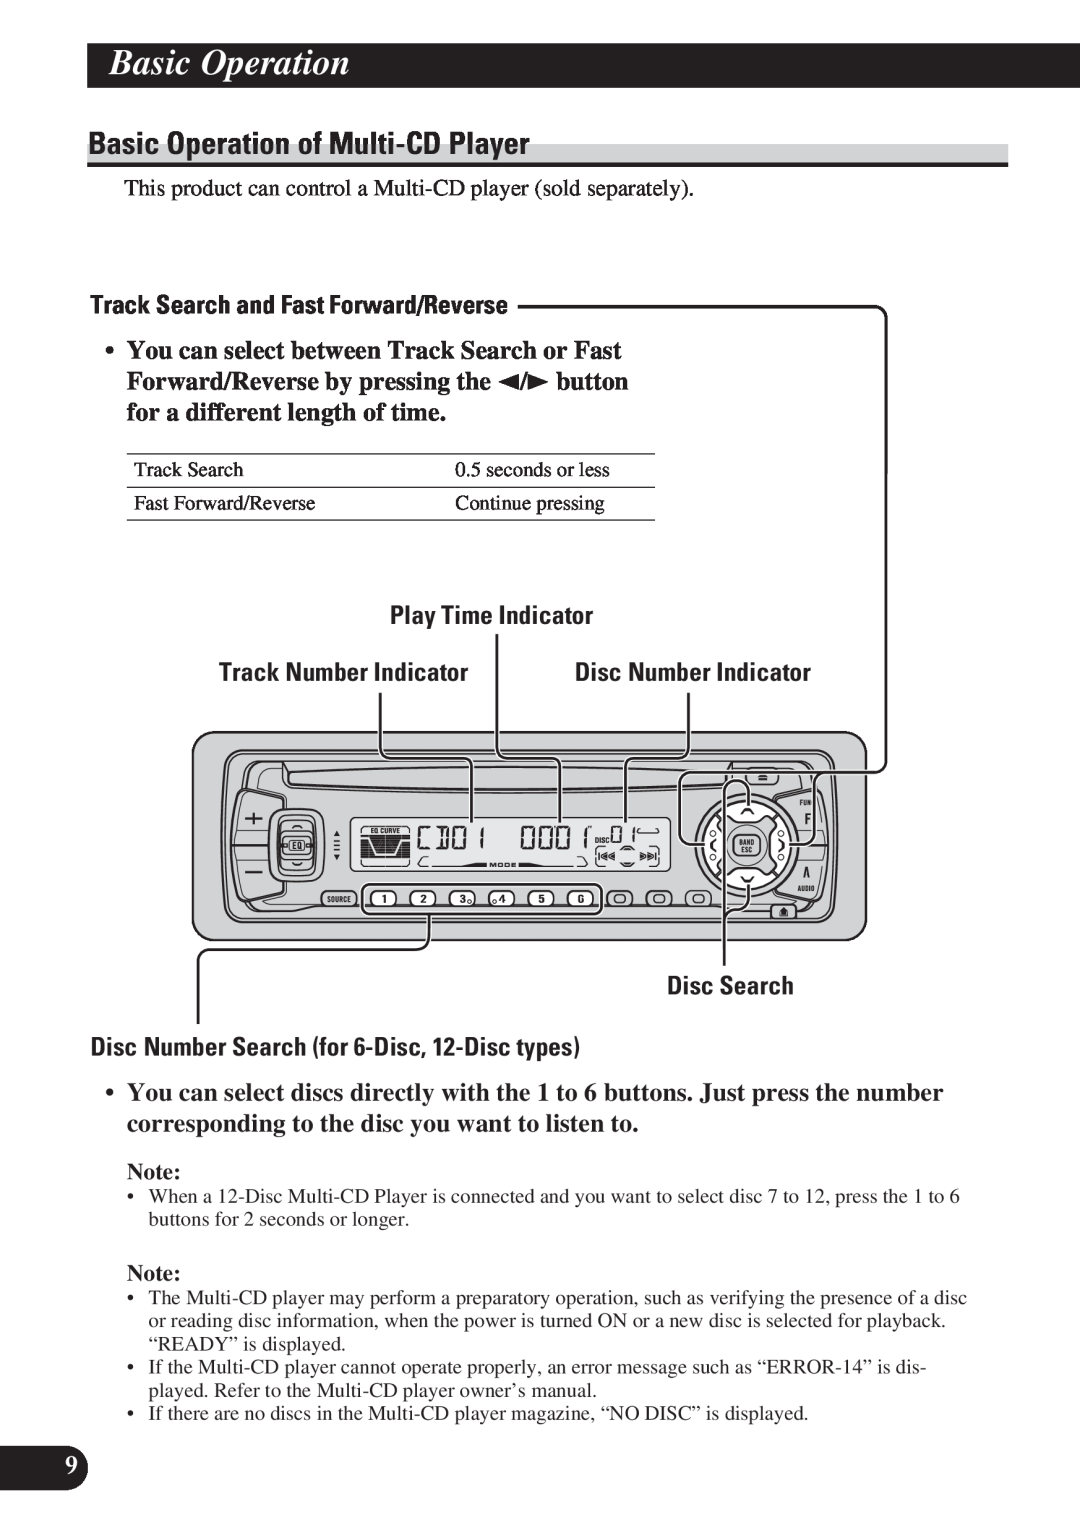 Pioneer DEH-P4150 operation manual Basic Operation of Multi-CDPlayer, Play Time Indicator, Disc Search 